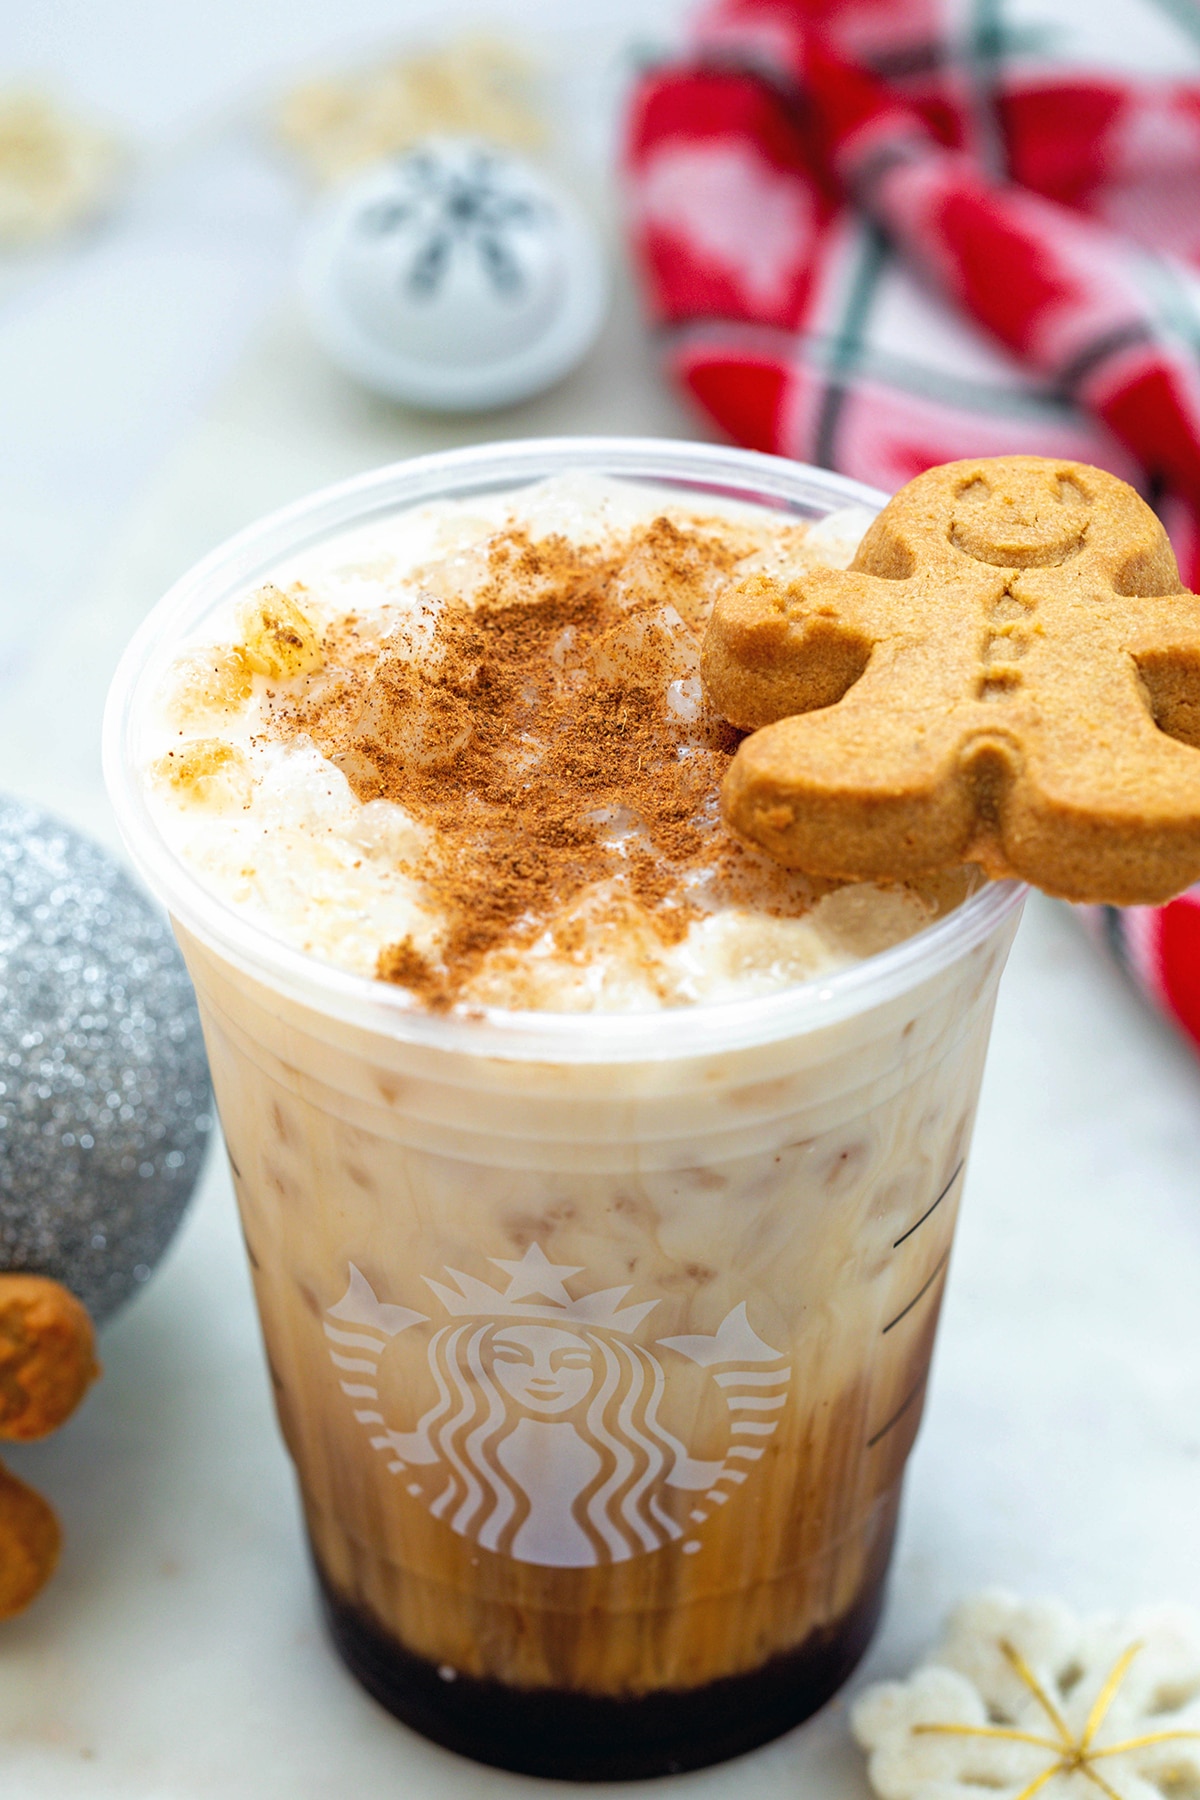 Overhead view of Iced gingerbread chai with gingerbread man cookie on top.